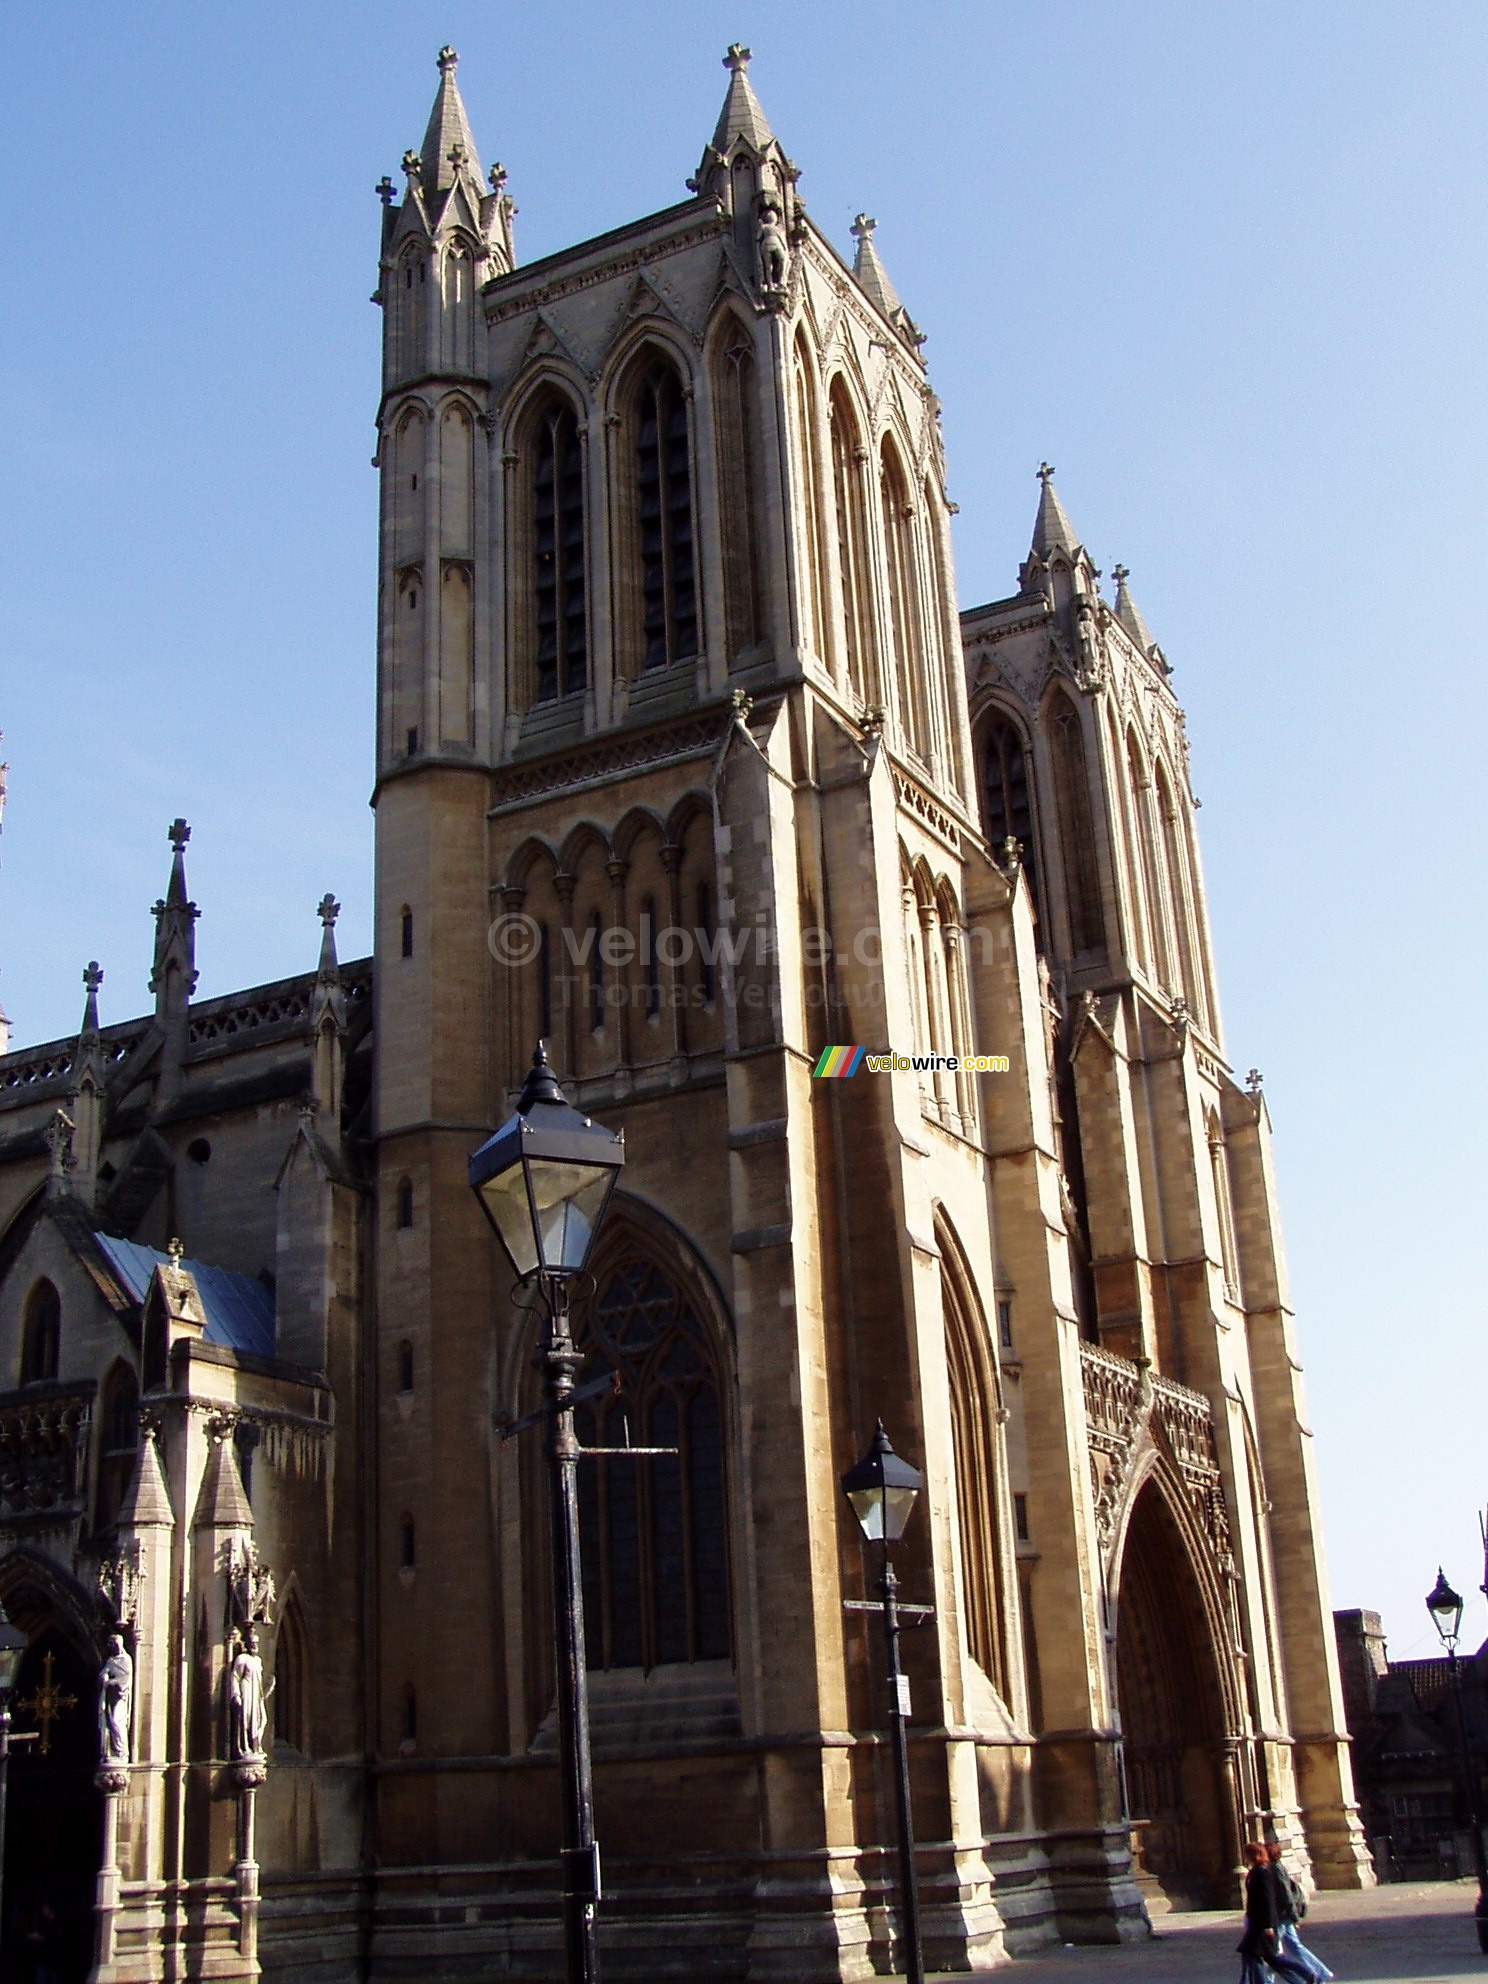 The cathedral of Bristol